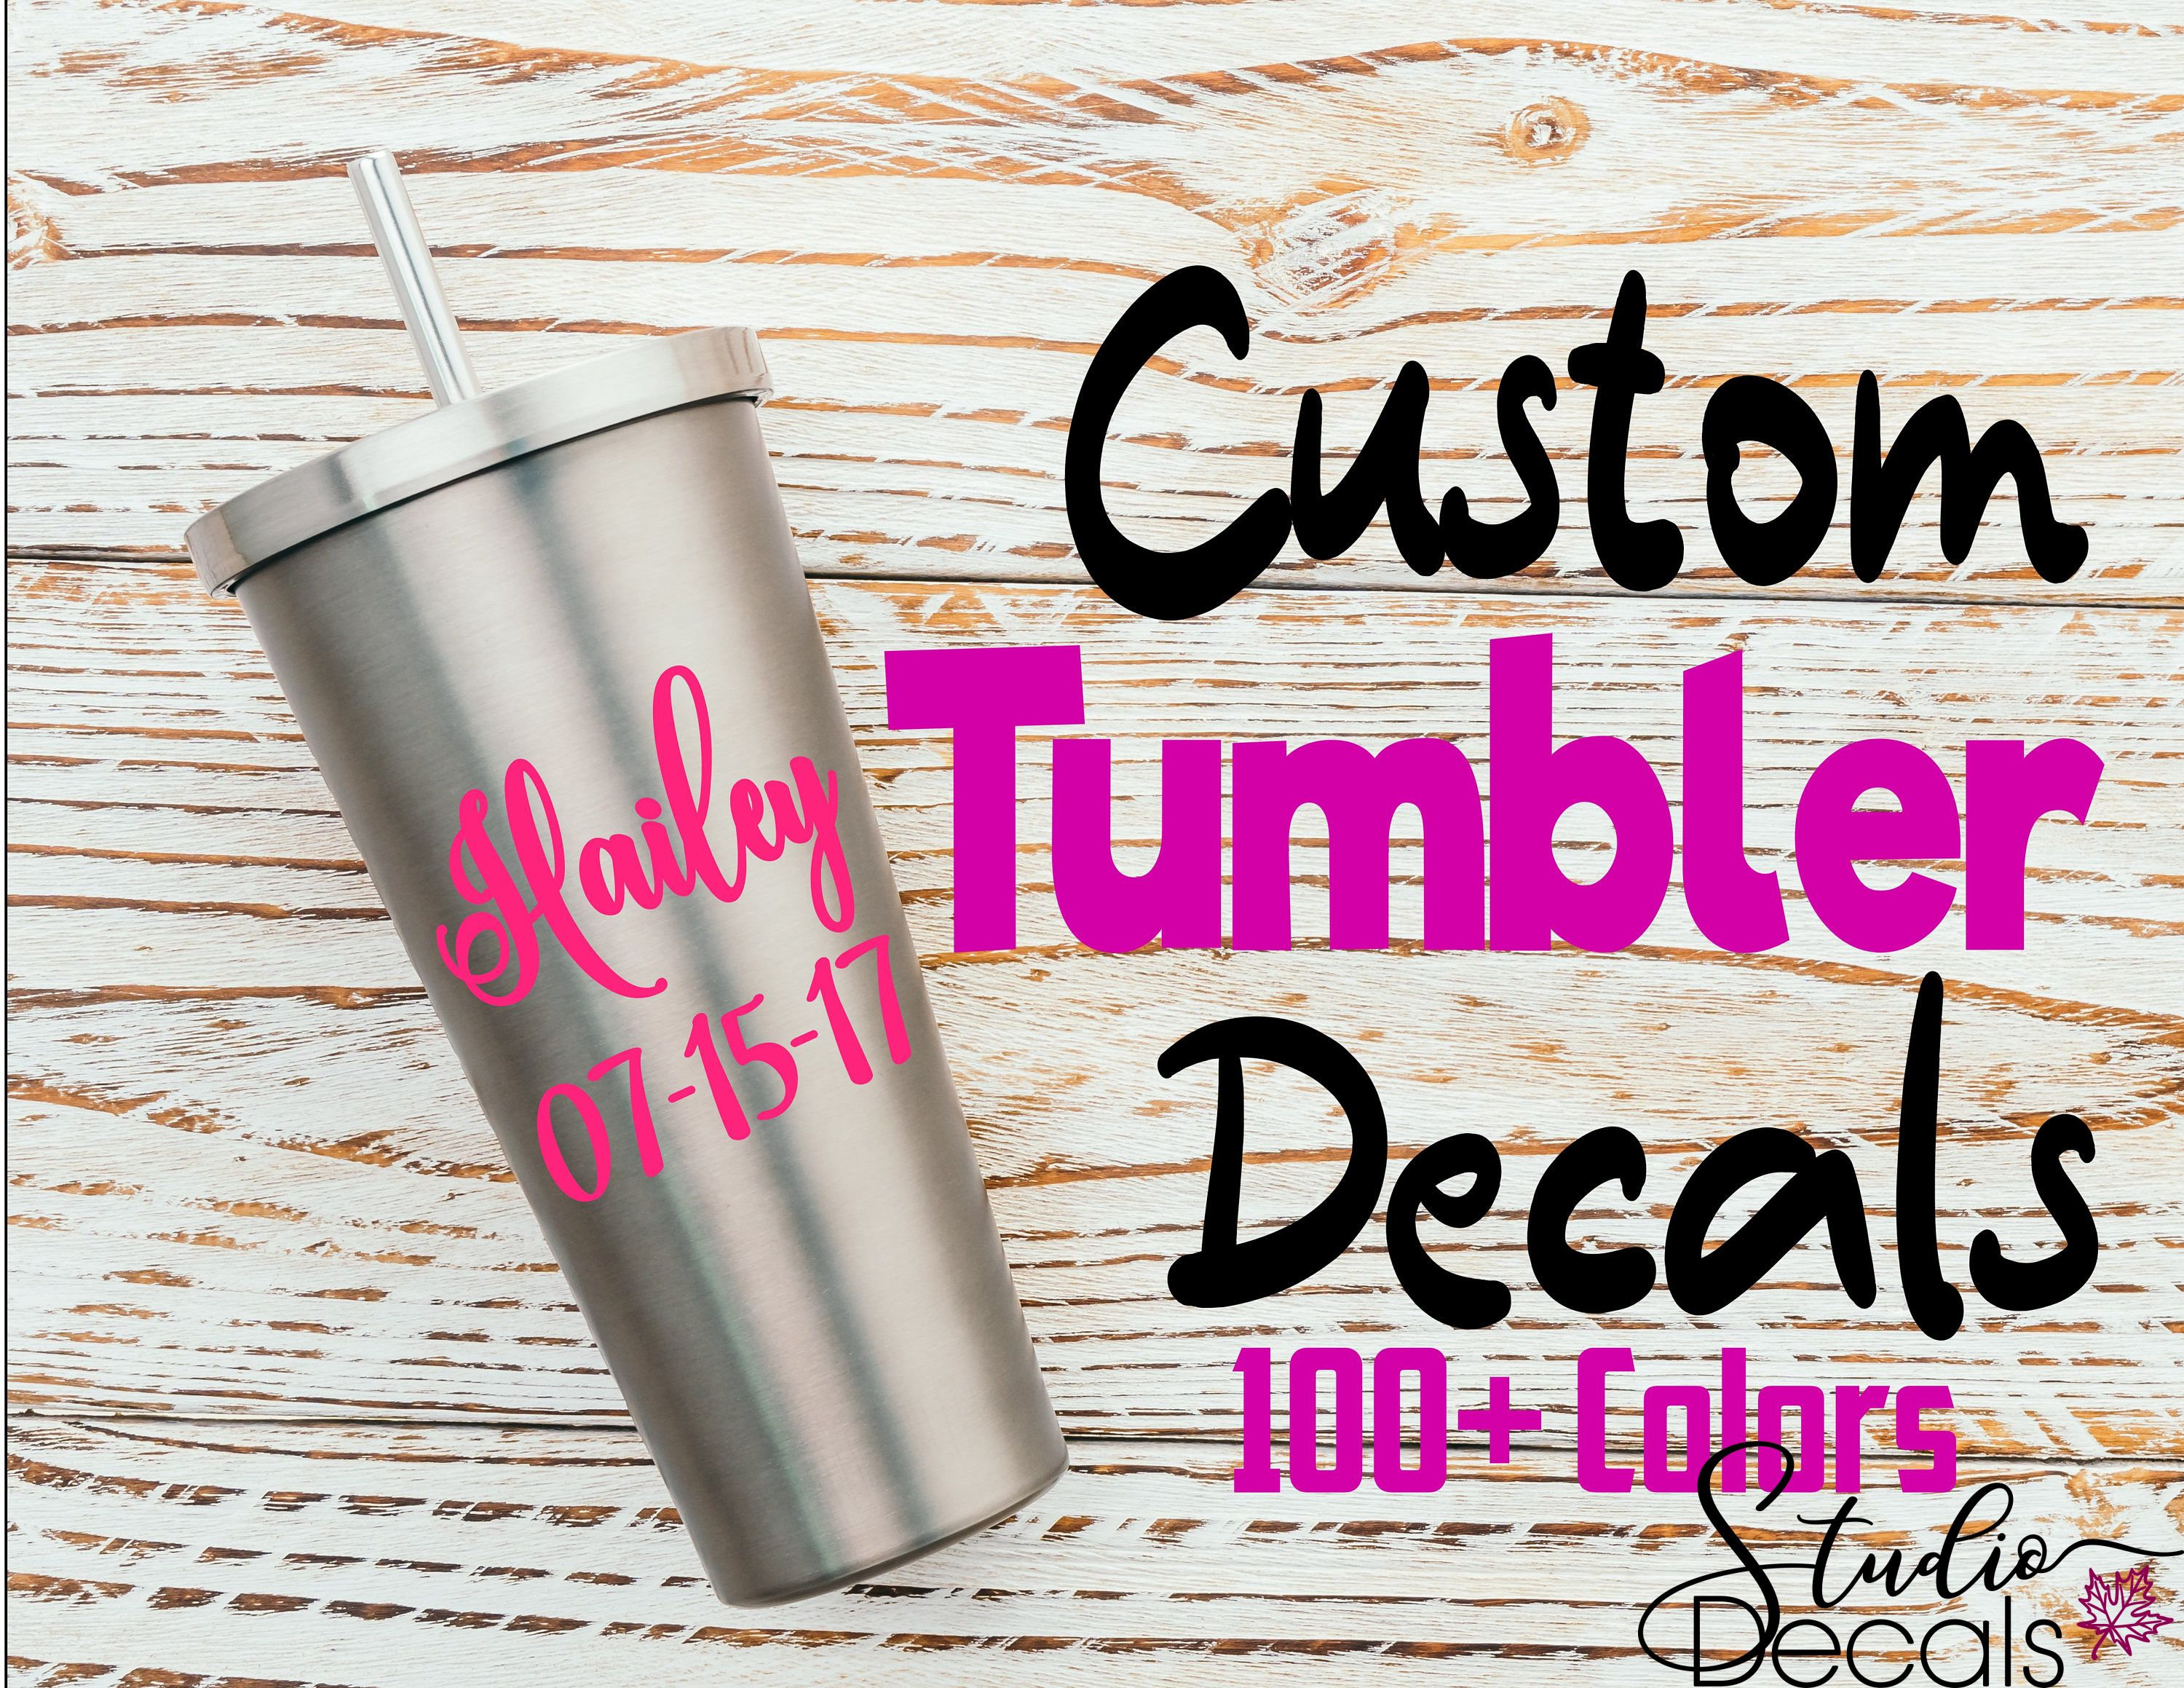 Custom Name Decal Stickers for Glass, Cups, Tumblers, Balloons, & More /  Personalized Bridal Party, Wedding, Baby Shower, Birthday Gift 